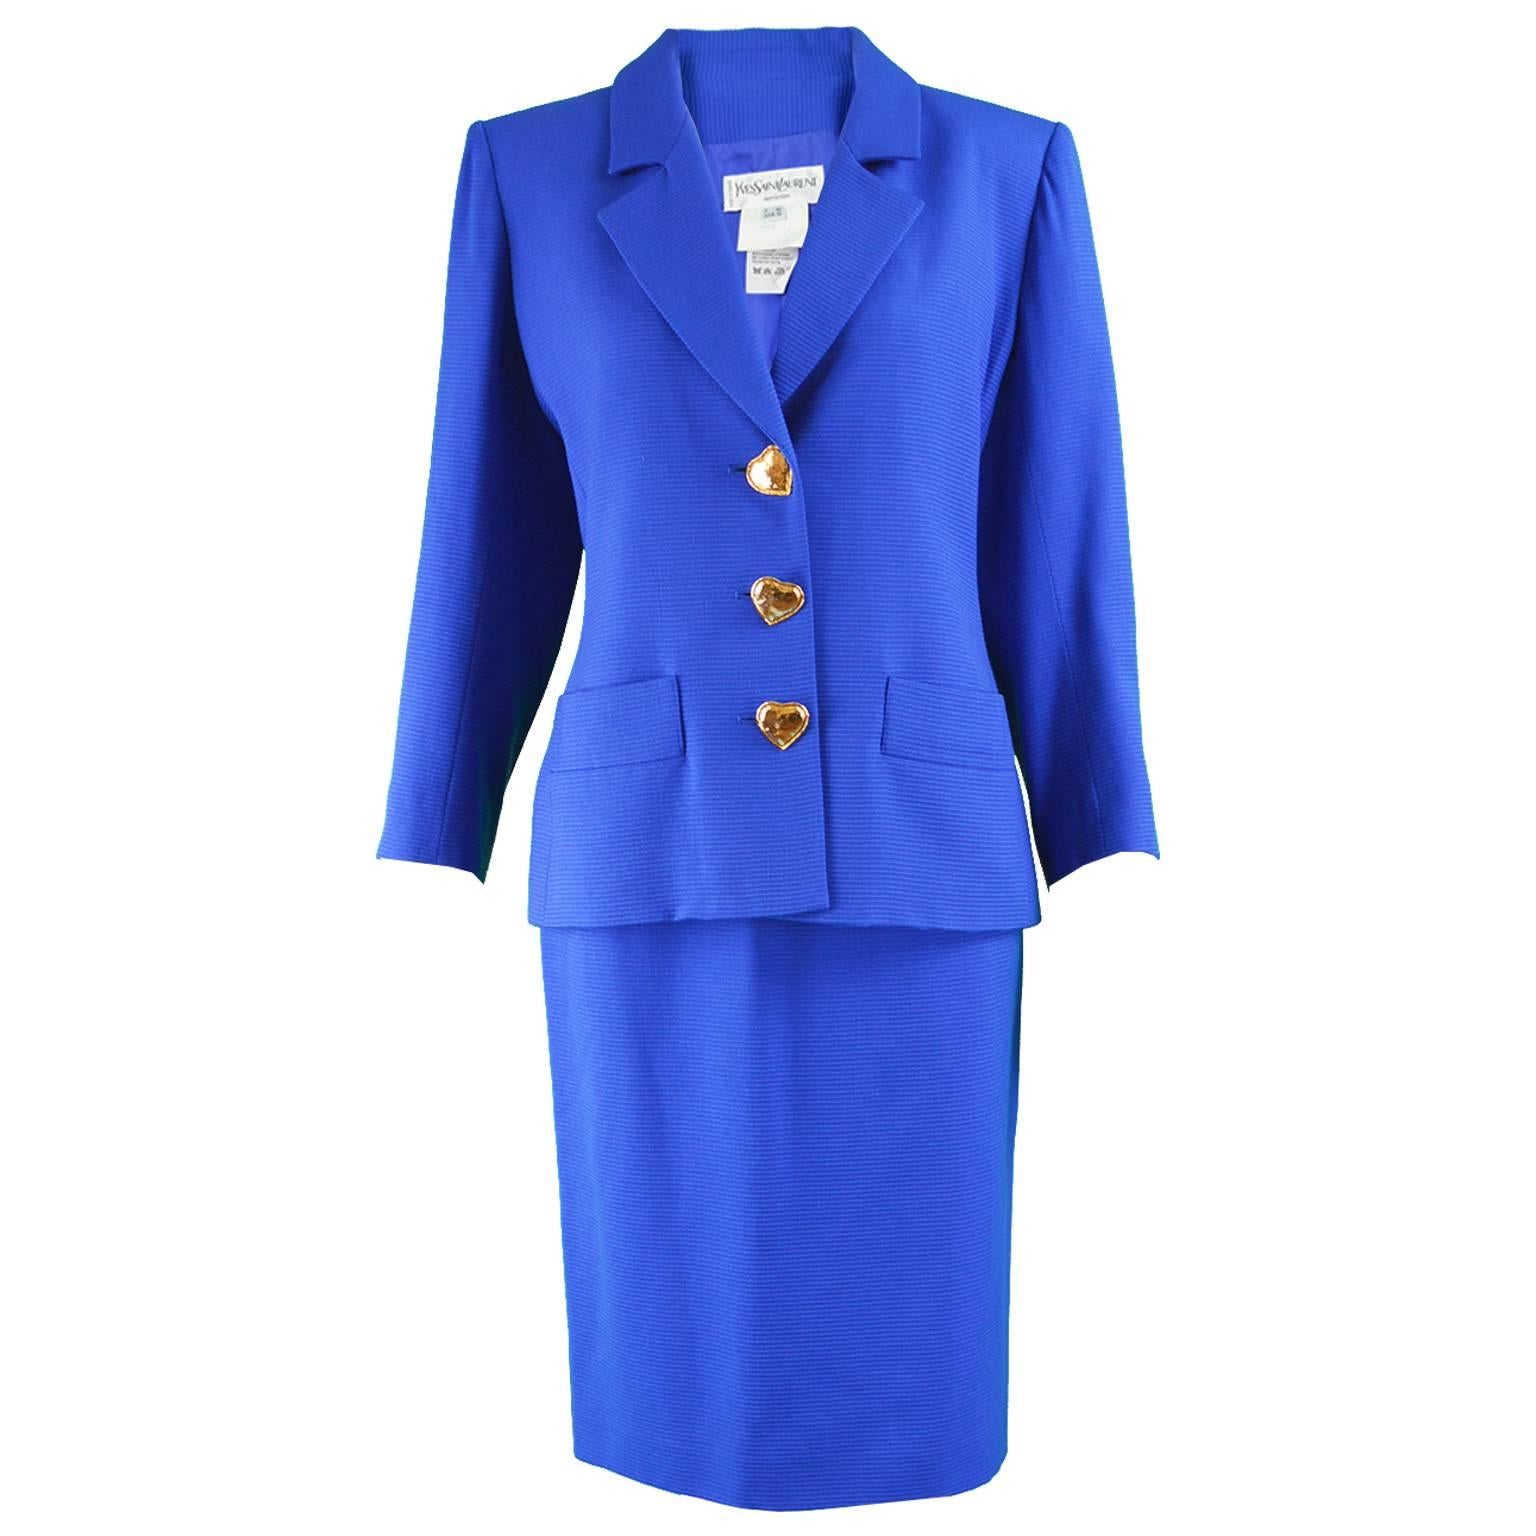 Yves Saint Laurent Blue Wool Blazer and Skirt Suit with Heart Buttons, 1980s